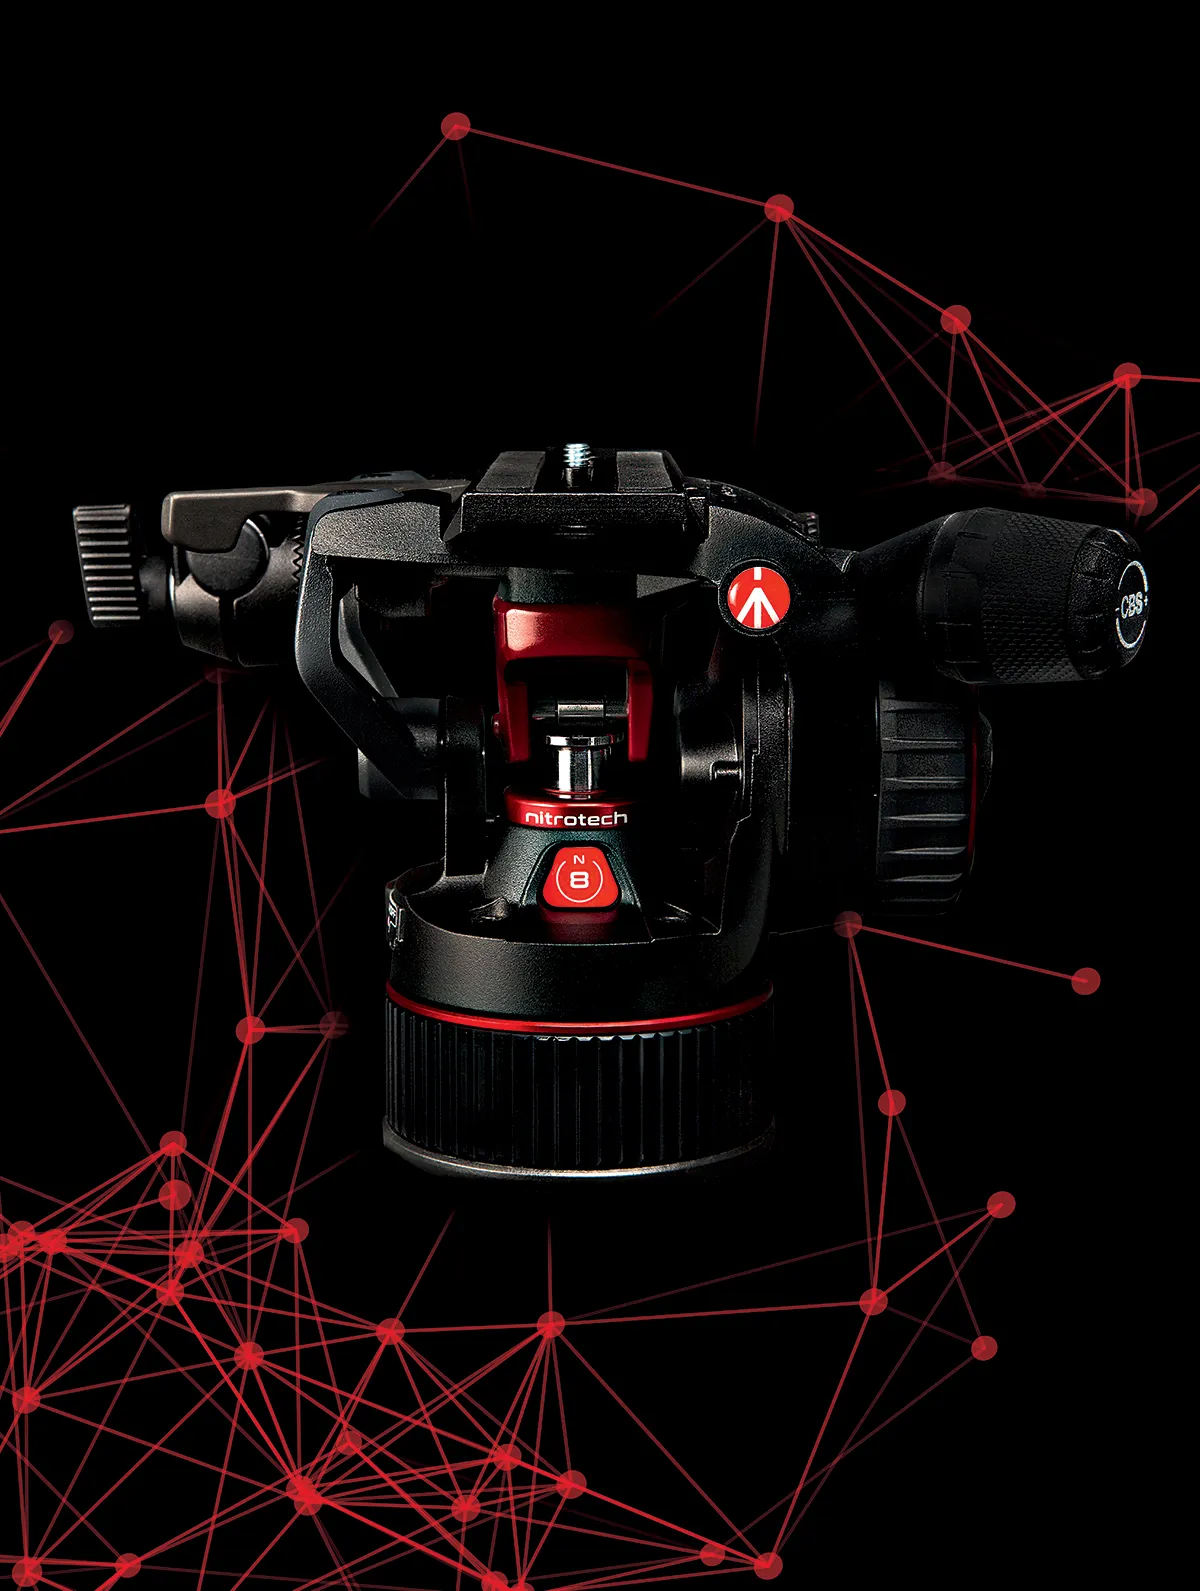 Manfrotto - 以摄影热情，叙述MANFROTTO的故事。 - By HDG